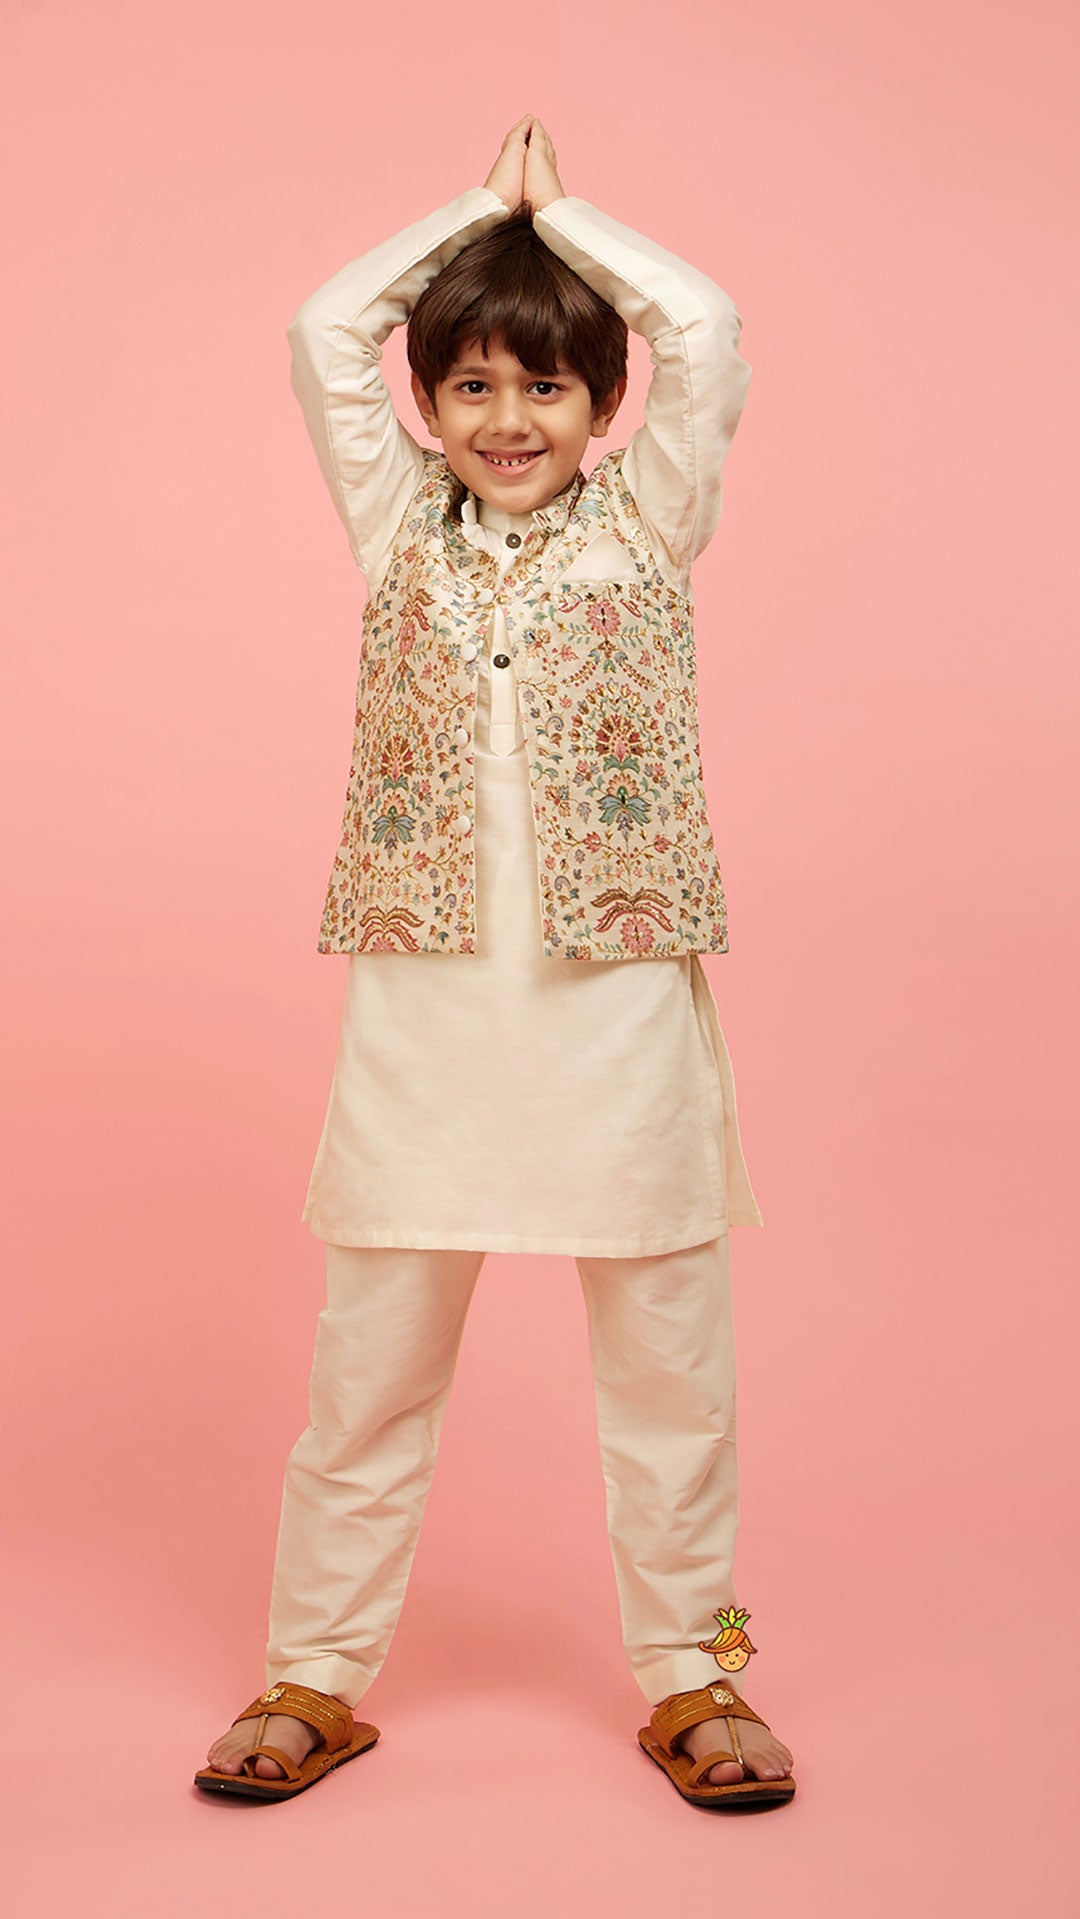 Floral Printed Golden Thread Work Jacket With Off White Kurta And Pyjama